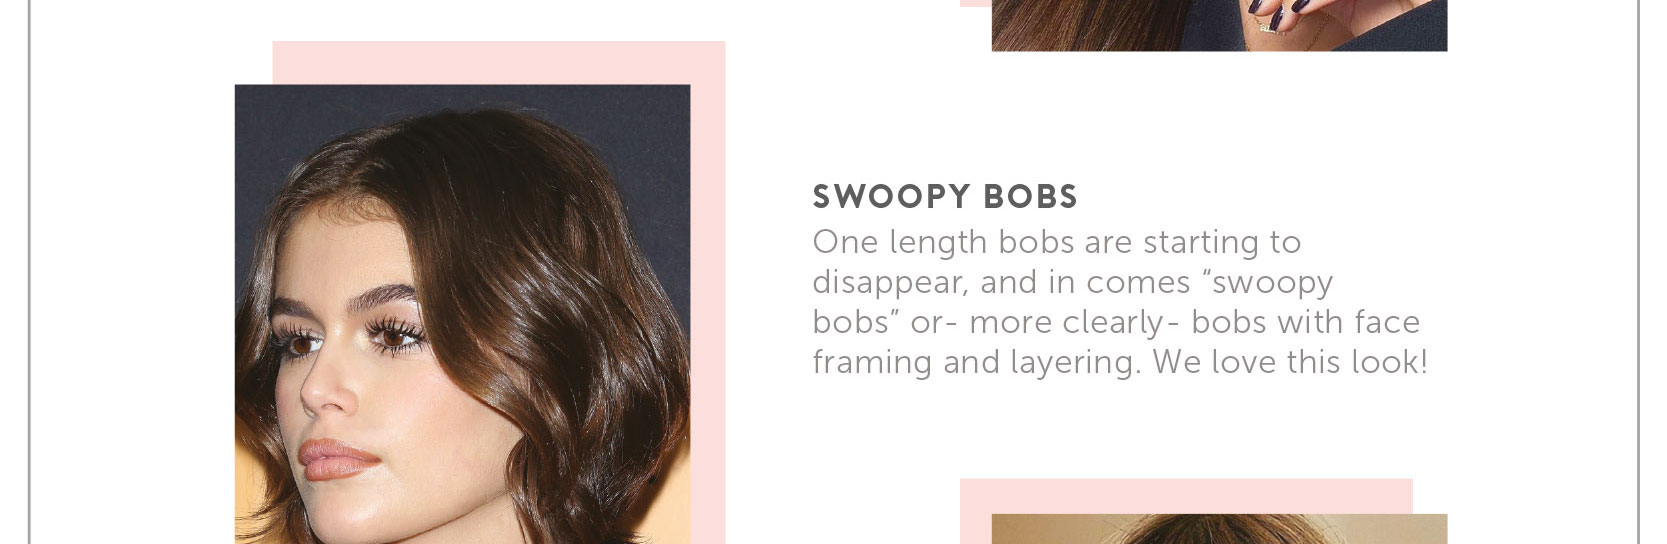 Swoopy Bobs. One length bobs are starting to disappear, and in comes "Swoopy bobs" or - more clearly - bobs with face framing and layering. We love this look!